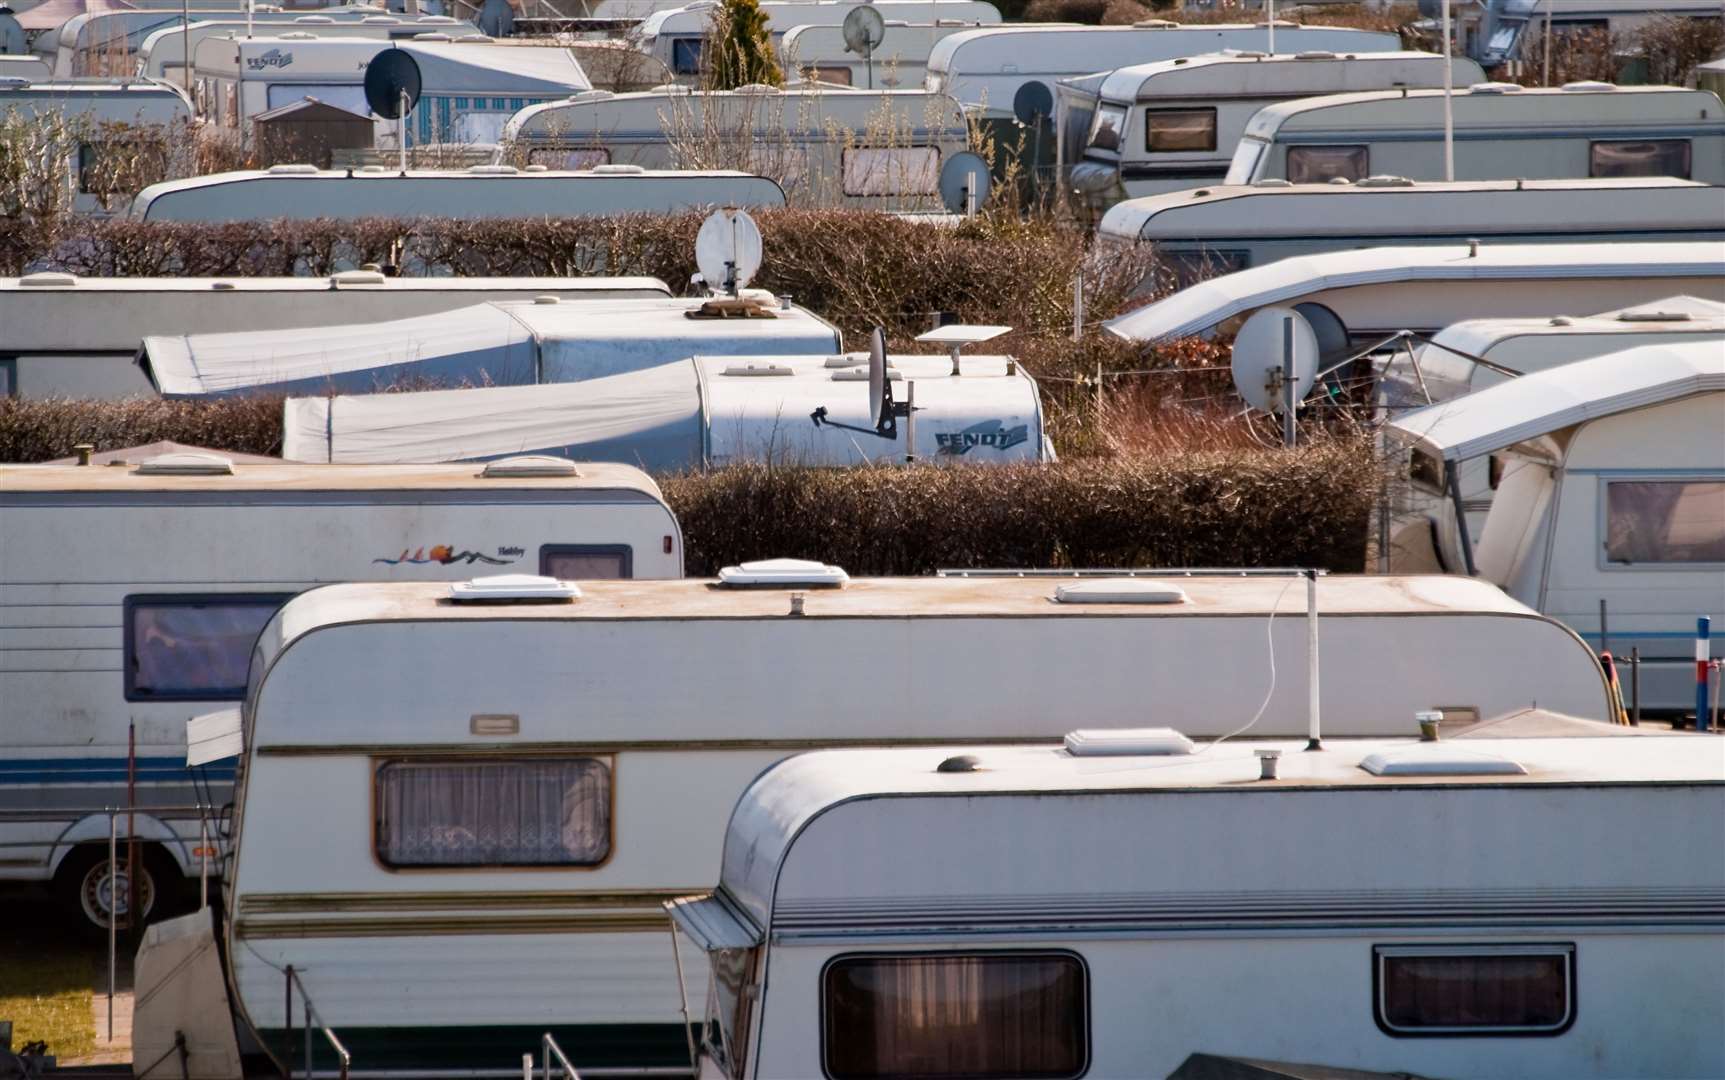 Hundreds of caravans were pitched on unauthorised sites in west Kent at the last count. Picture: Thinkstock Image Library